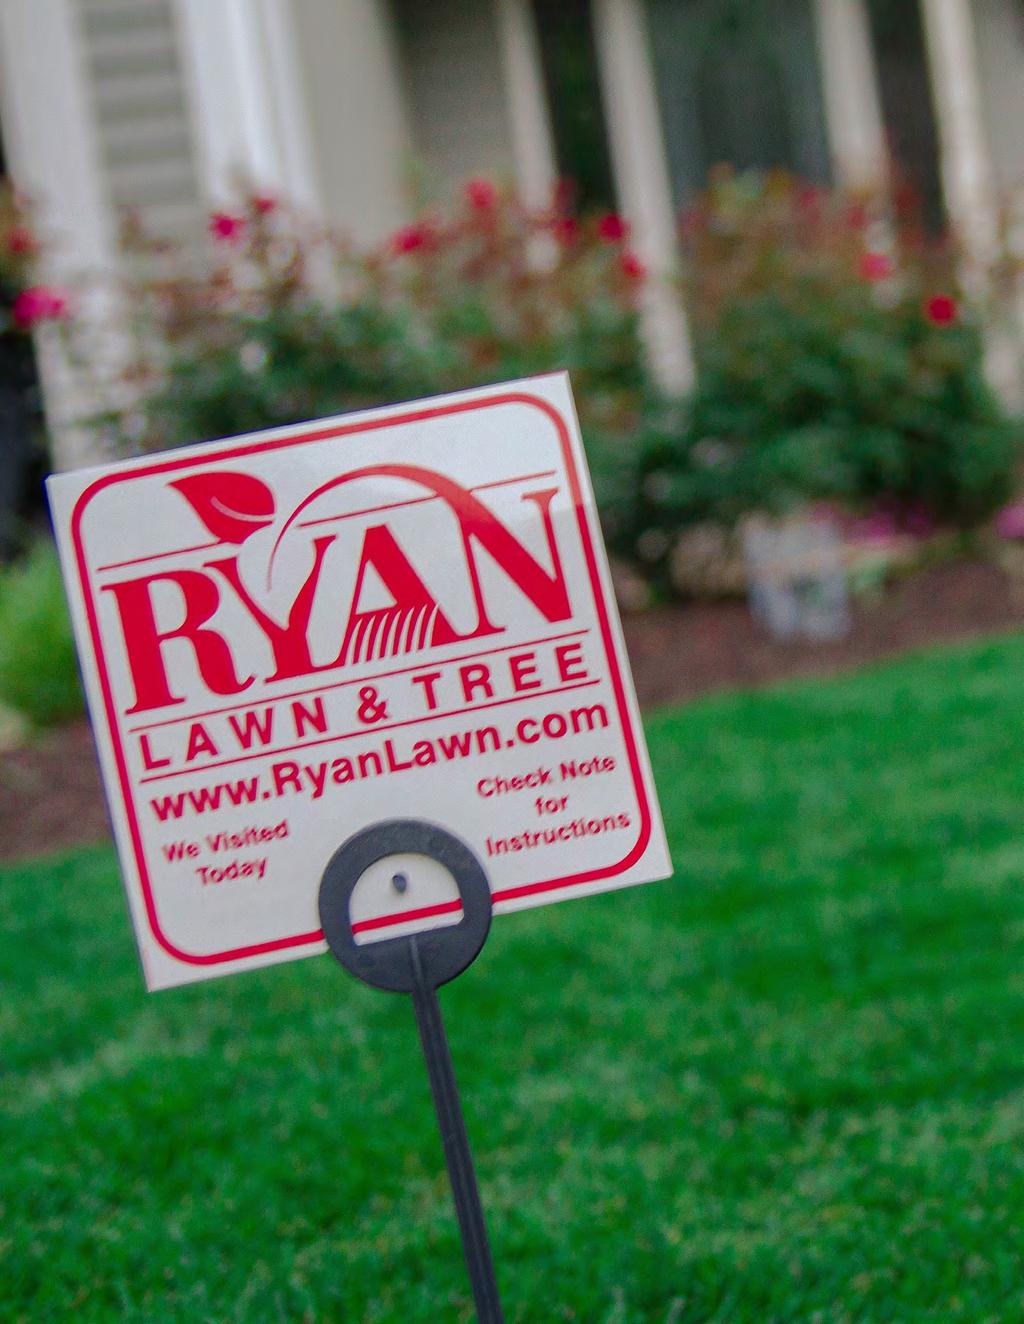 Saving Your Ash Trees How Ryan Lawn & Tree Can Help Saving your ash trees from this highly invasive species requires a two-pronged plan of action: prevention and maintenance.